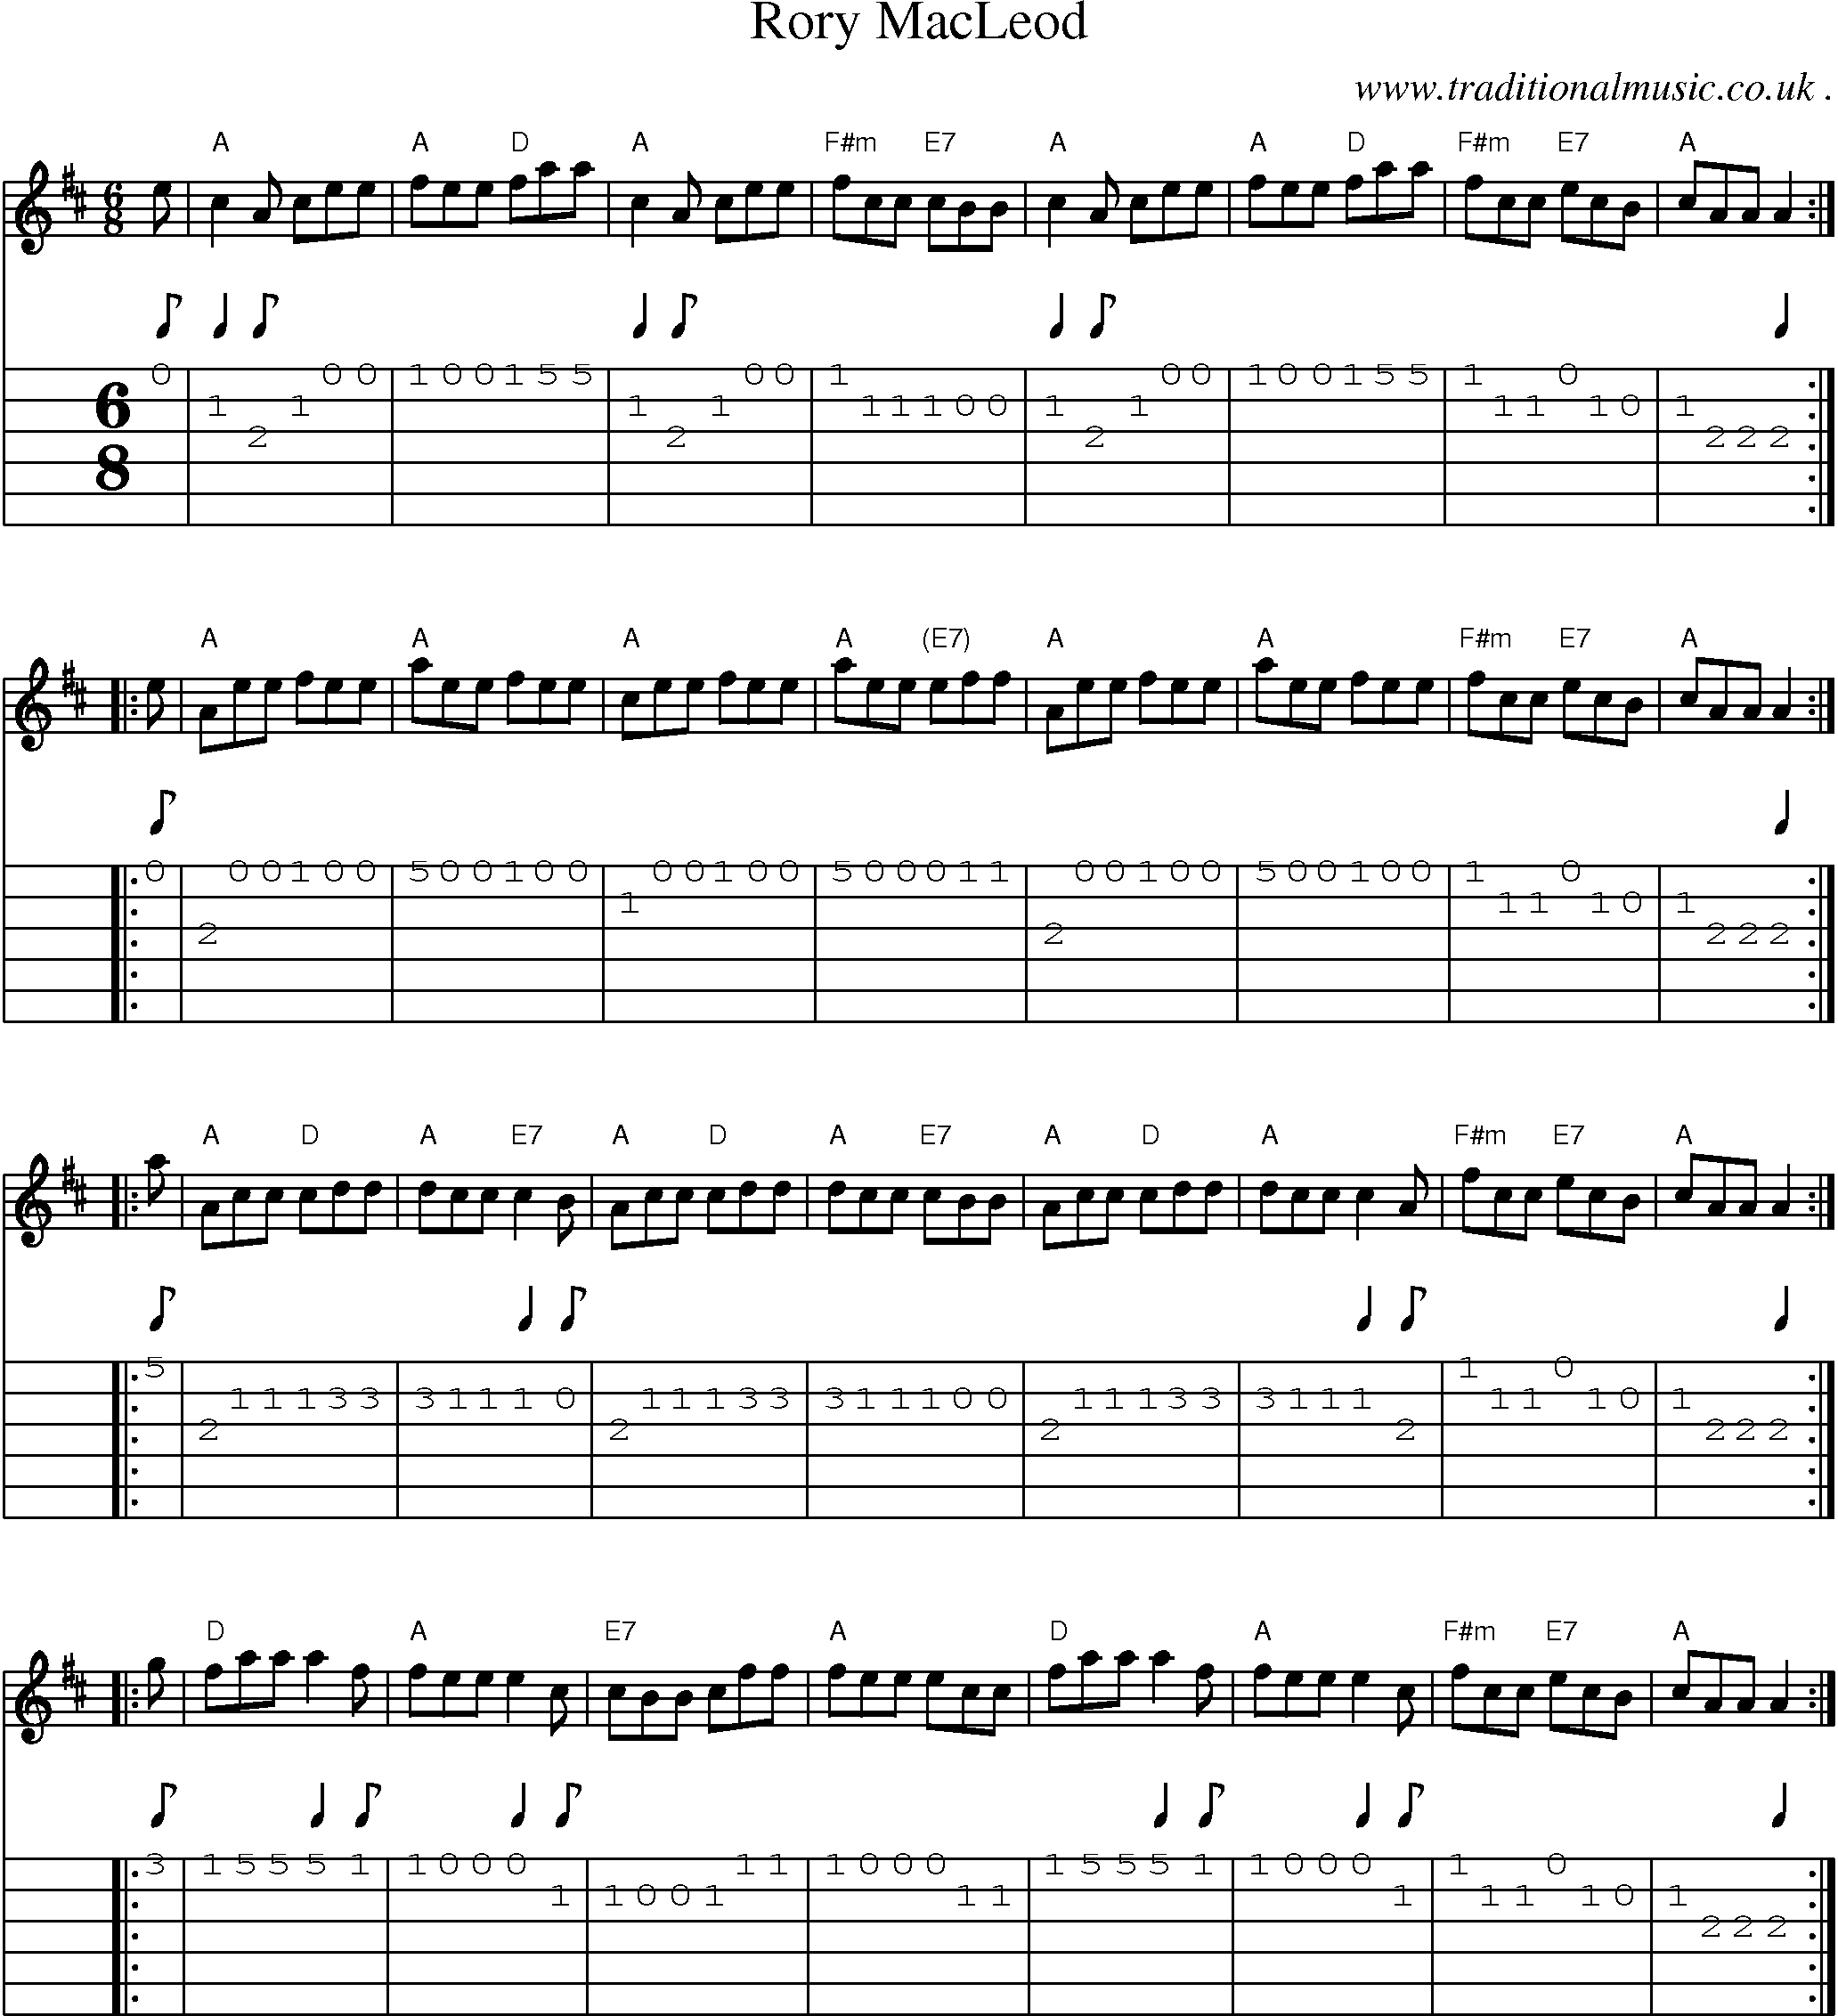 Sheet-music  score, Chords and Guitar Tabs for Rory Macleod